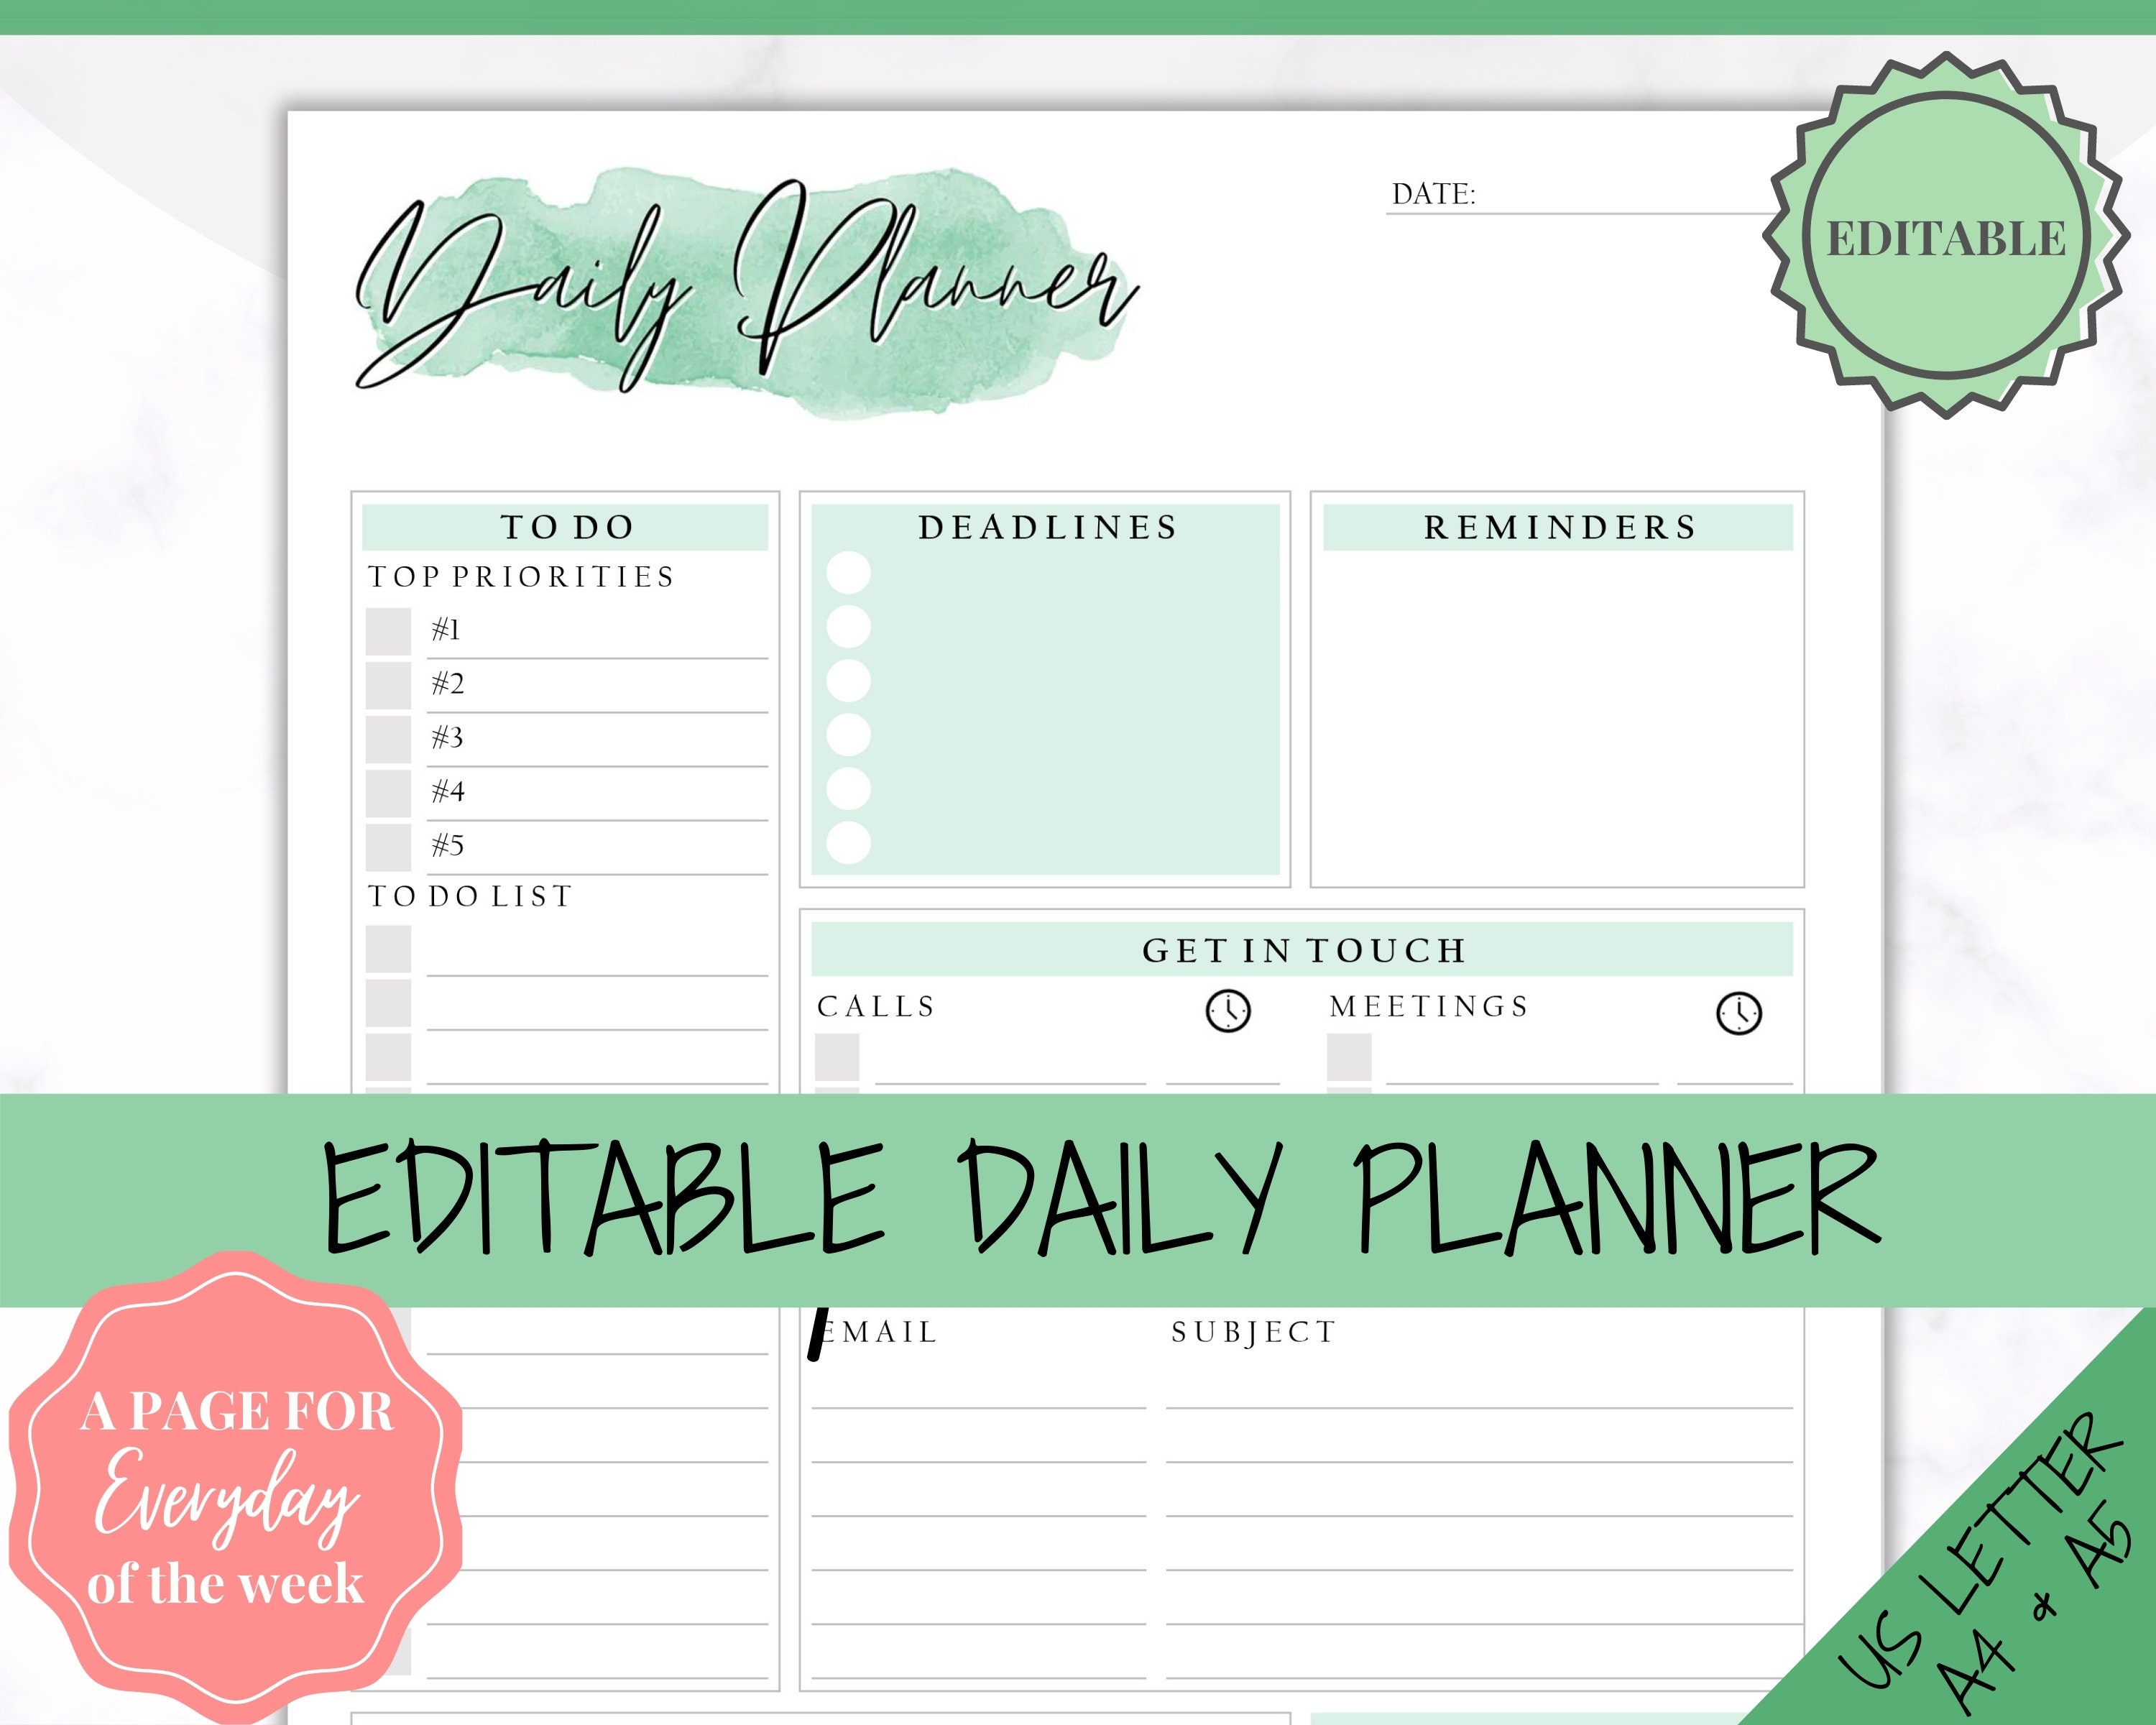 EDITABLE DAILY PLANNER to Do List Printable Productivity | Etsy